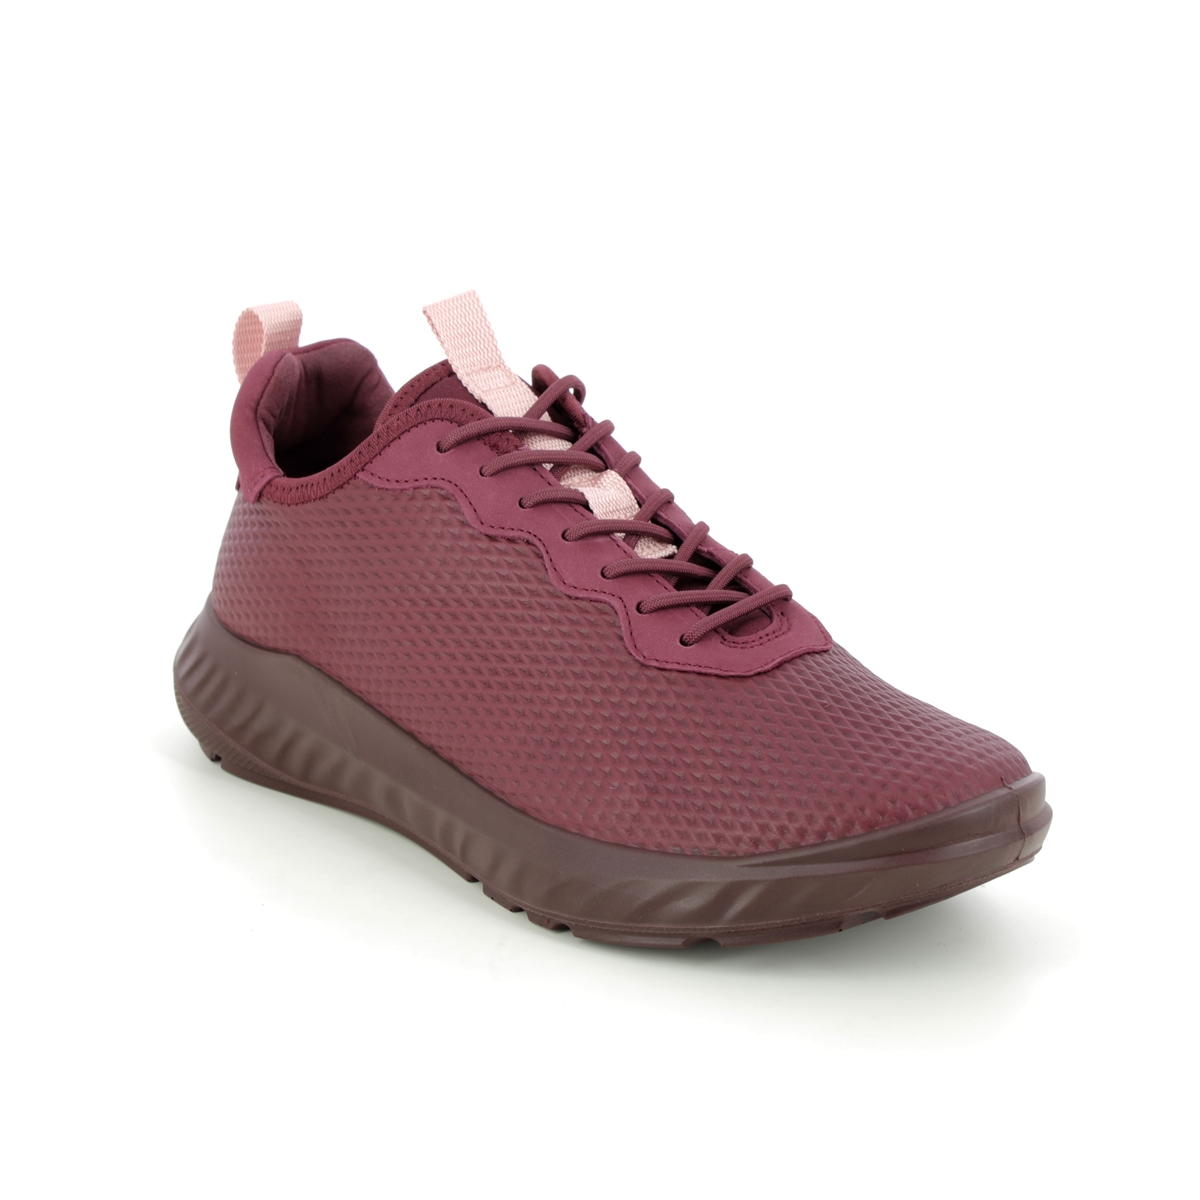 Ecco Ath 1Fw Plum Womens Trainers 834903-60501 In Size 39 In Plain Plum